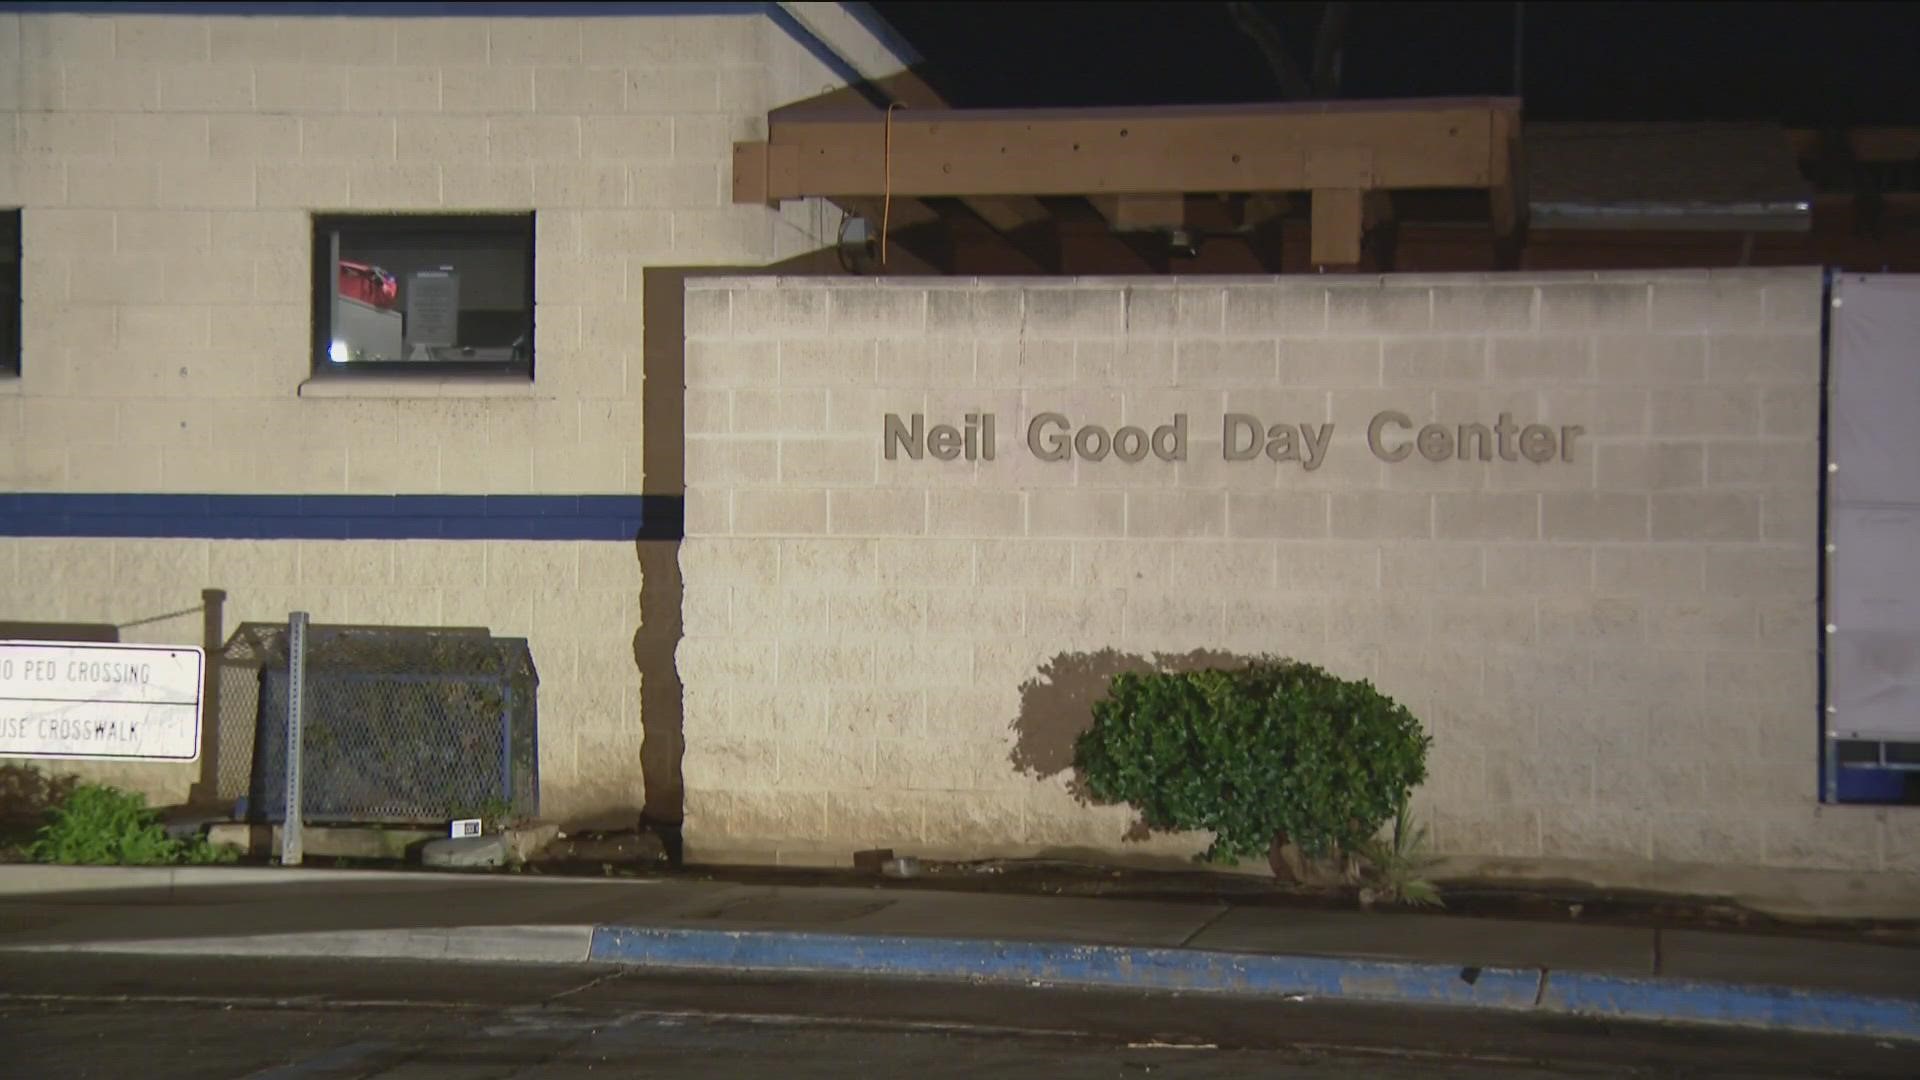 Neil Good Day Center will no longer be offering showers, laundry, and storage services on the weekends due to a shortage of funding.